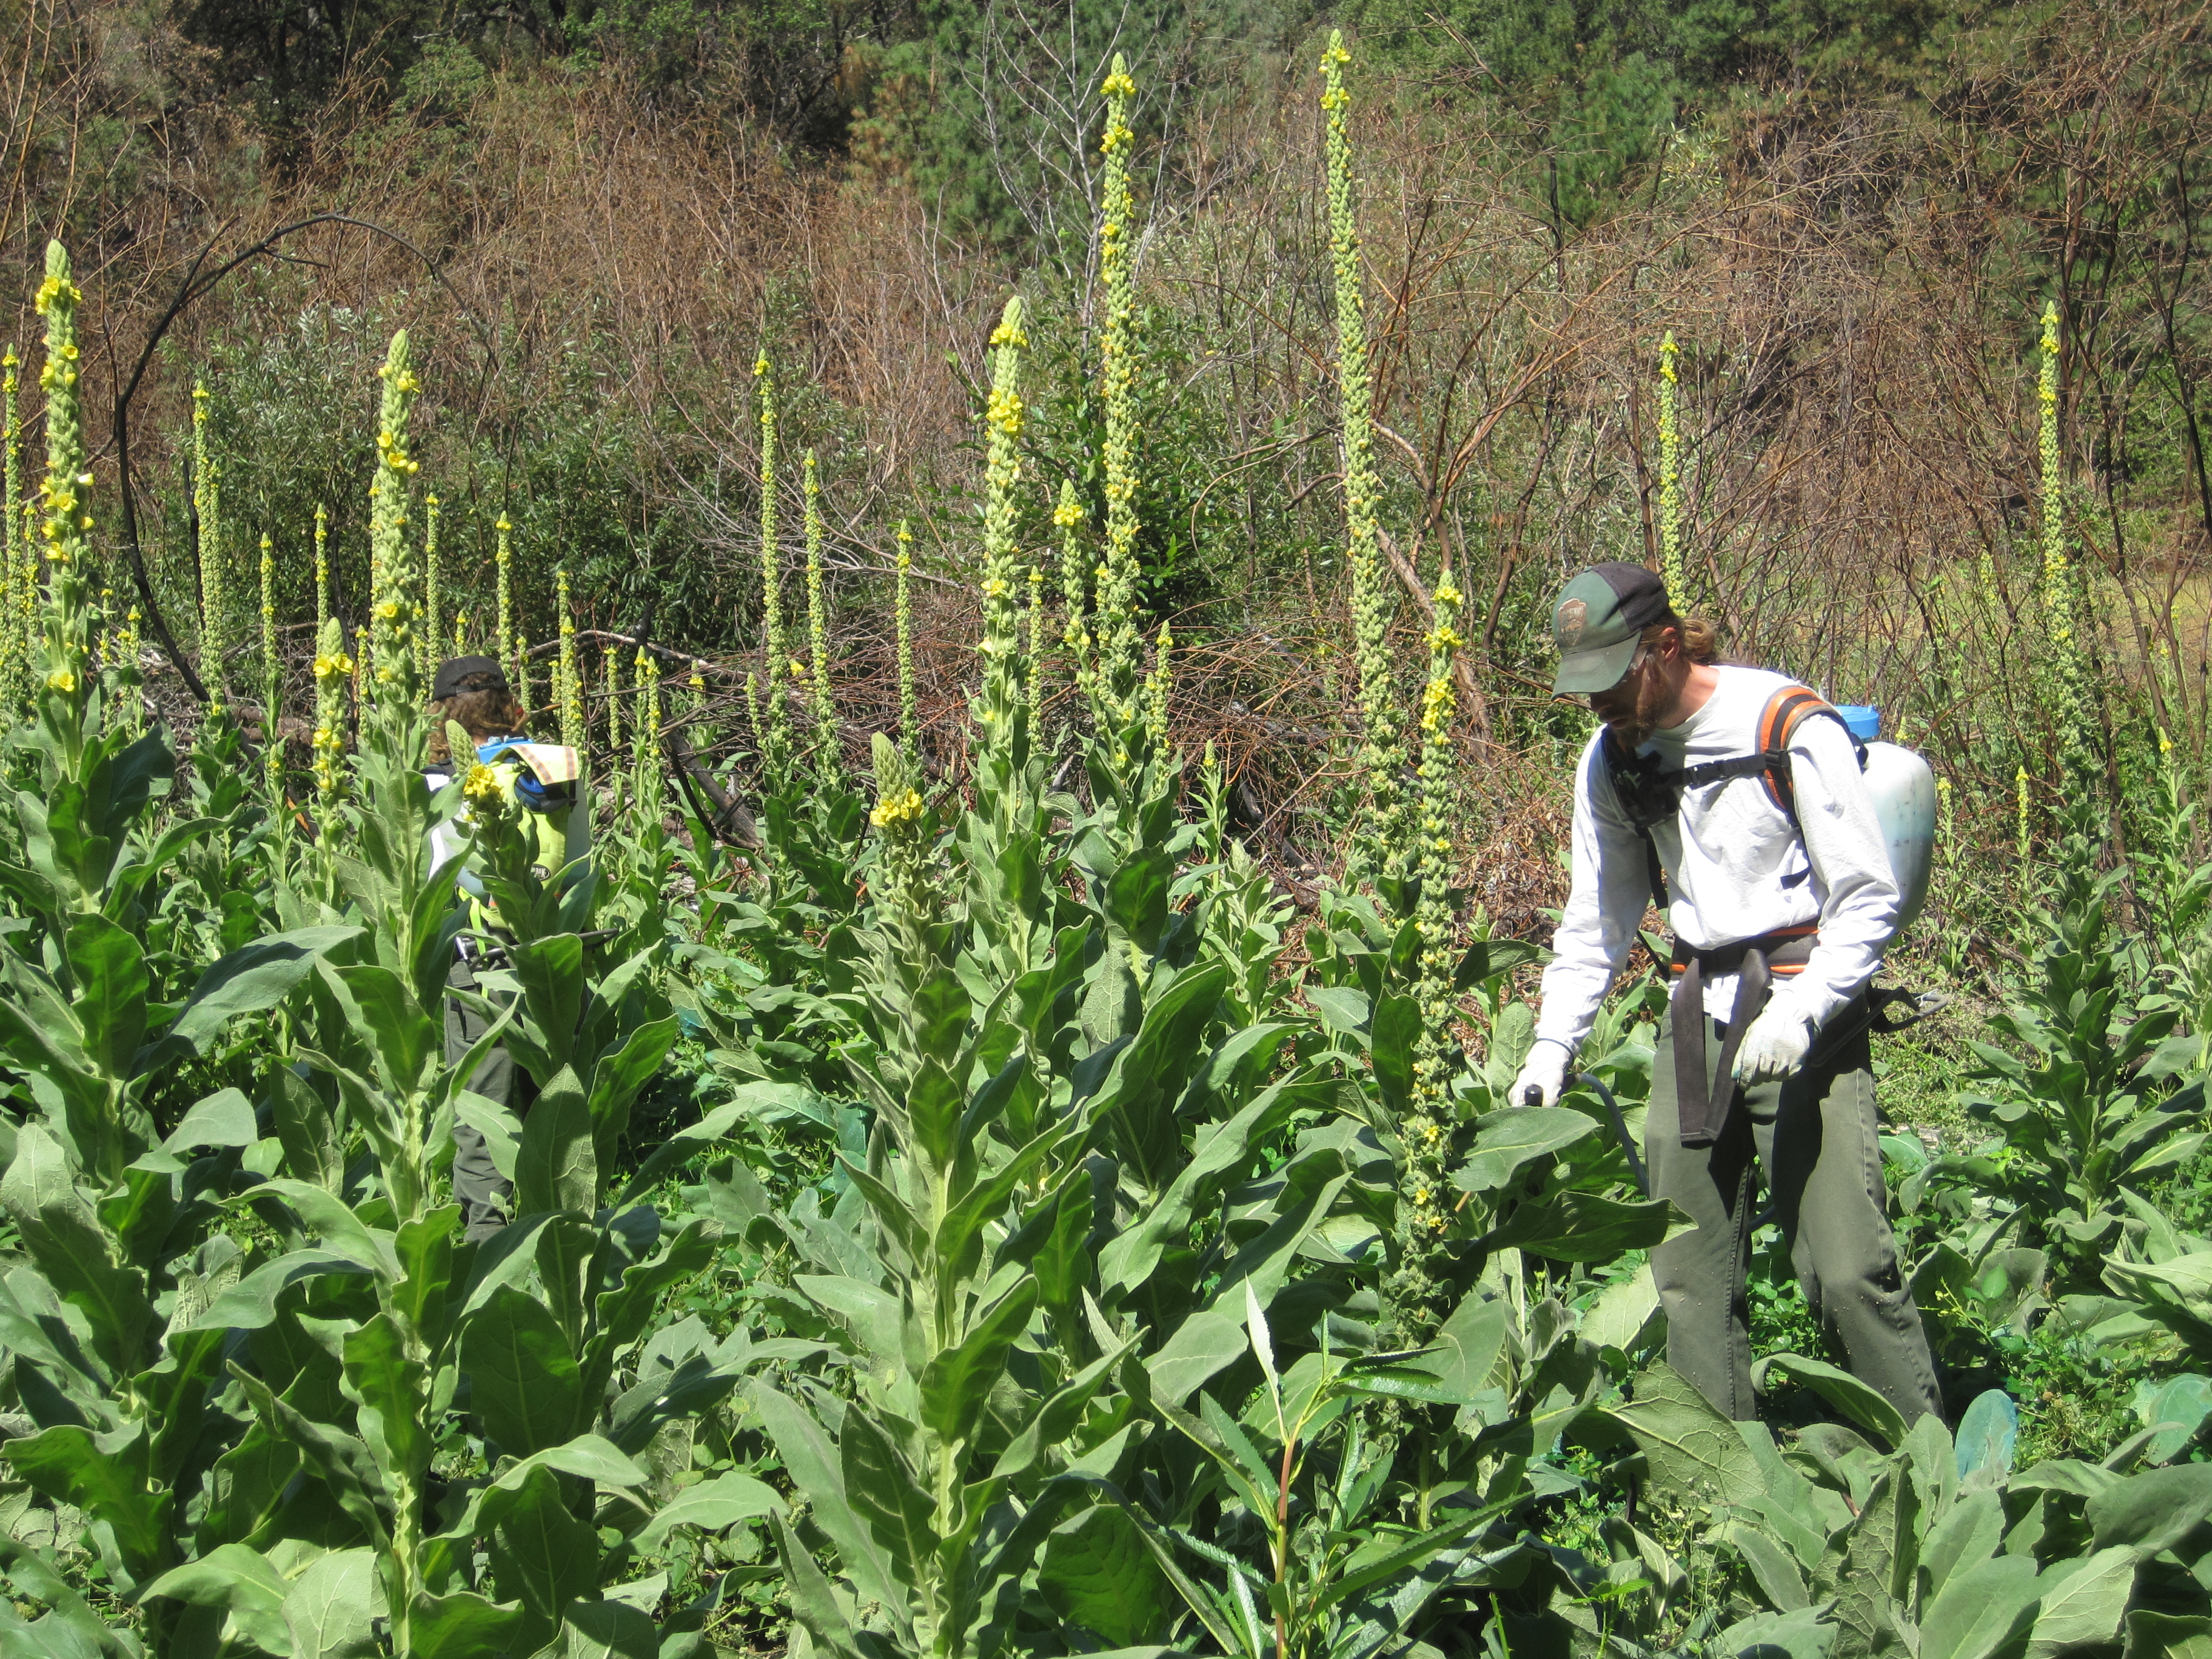 Treating mullein and Himalayan blackberry in Poopenaut Valley along the Tuolumne River, Yosemite National Park.